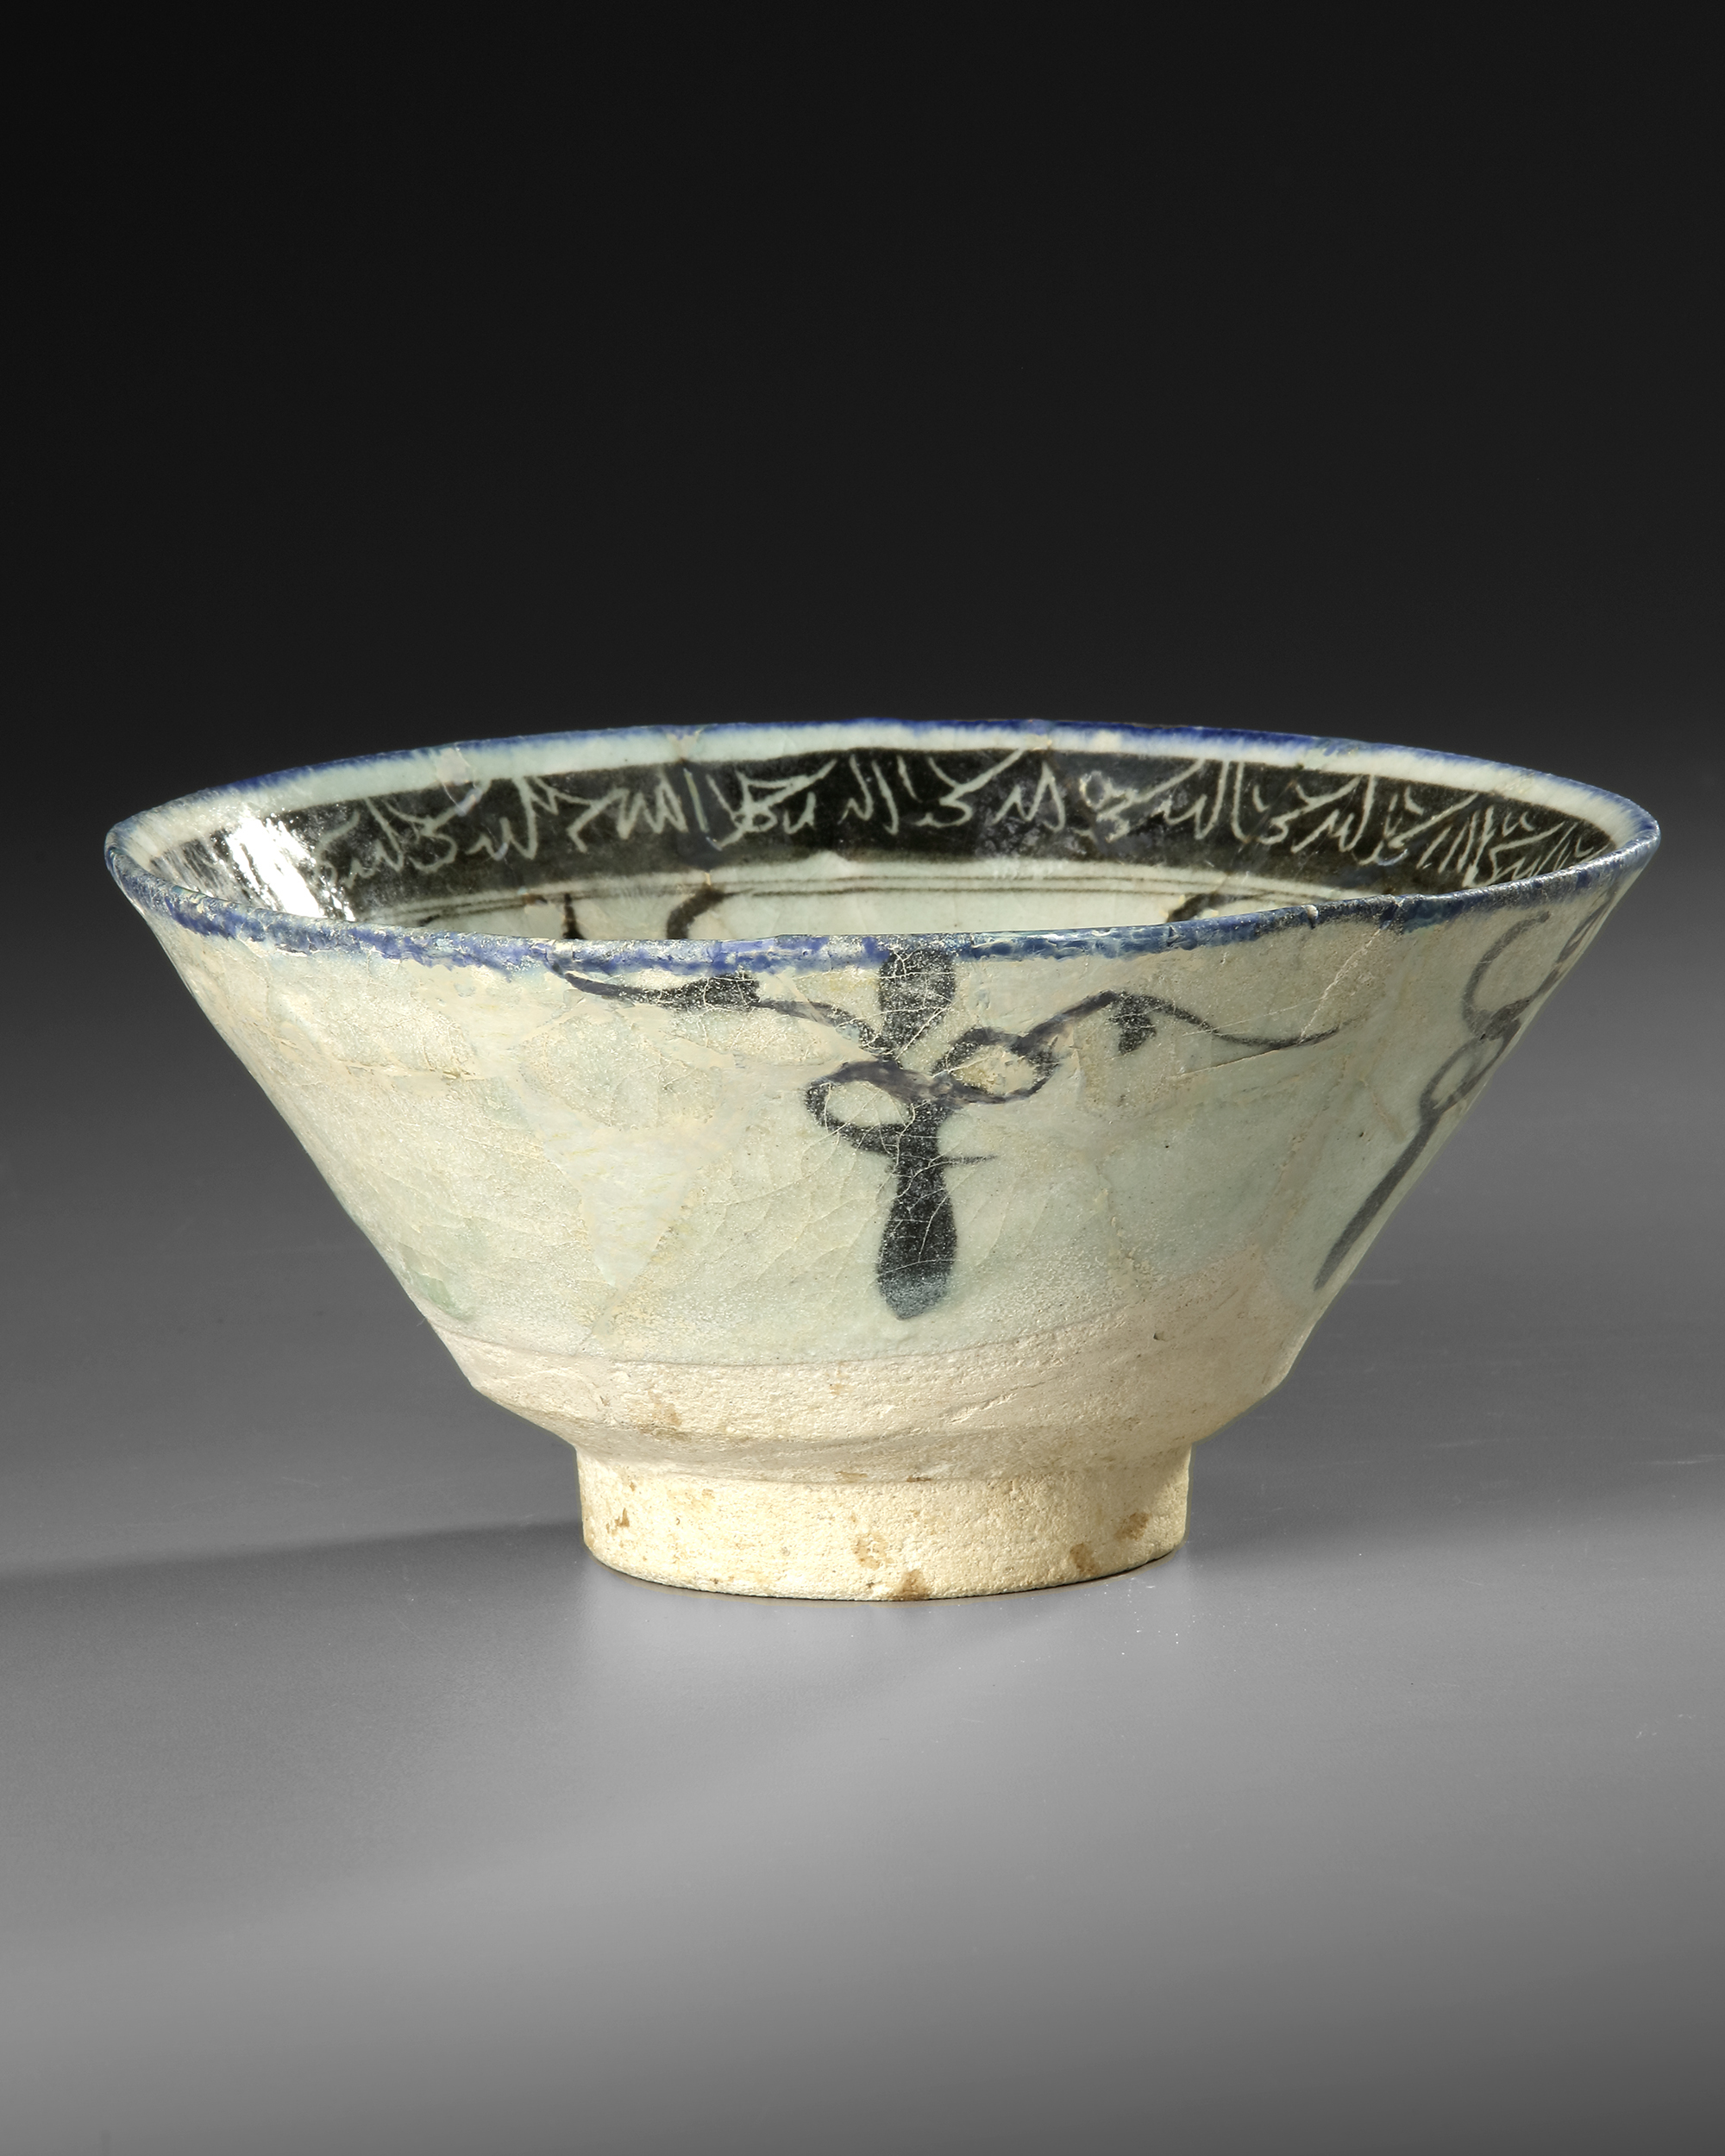 A KASHAN POTTERY BOWL, PERSIA, 13TH CENTURY - Image 3 of 8